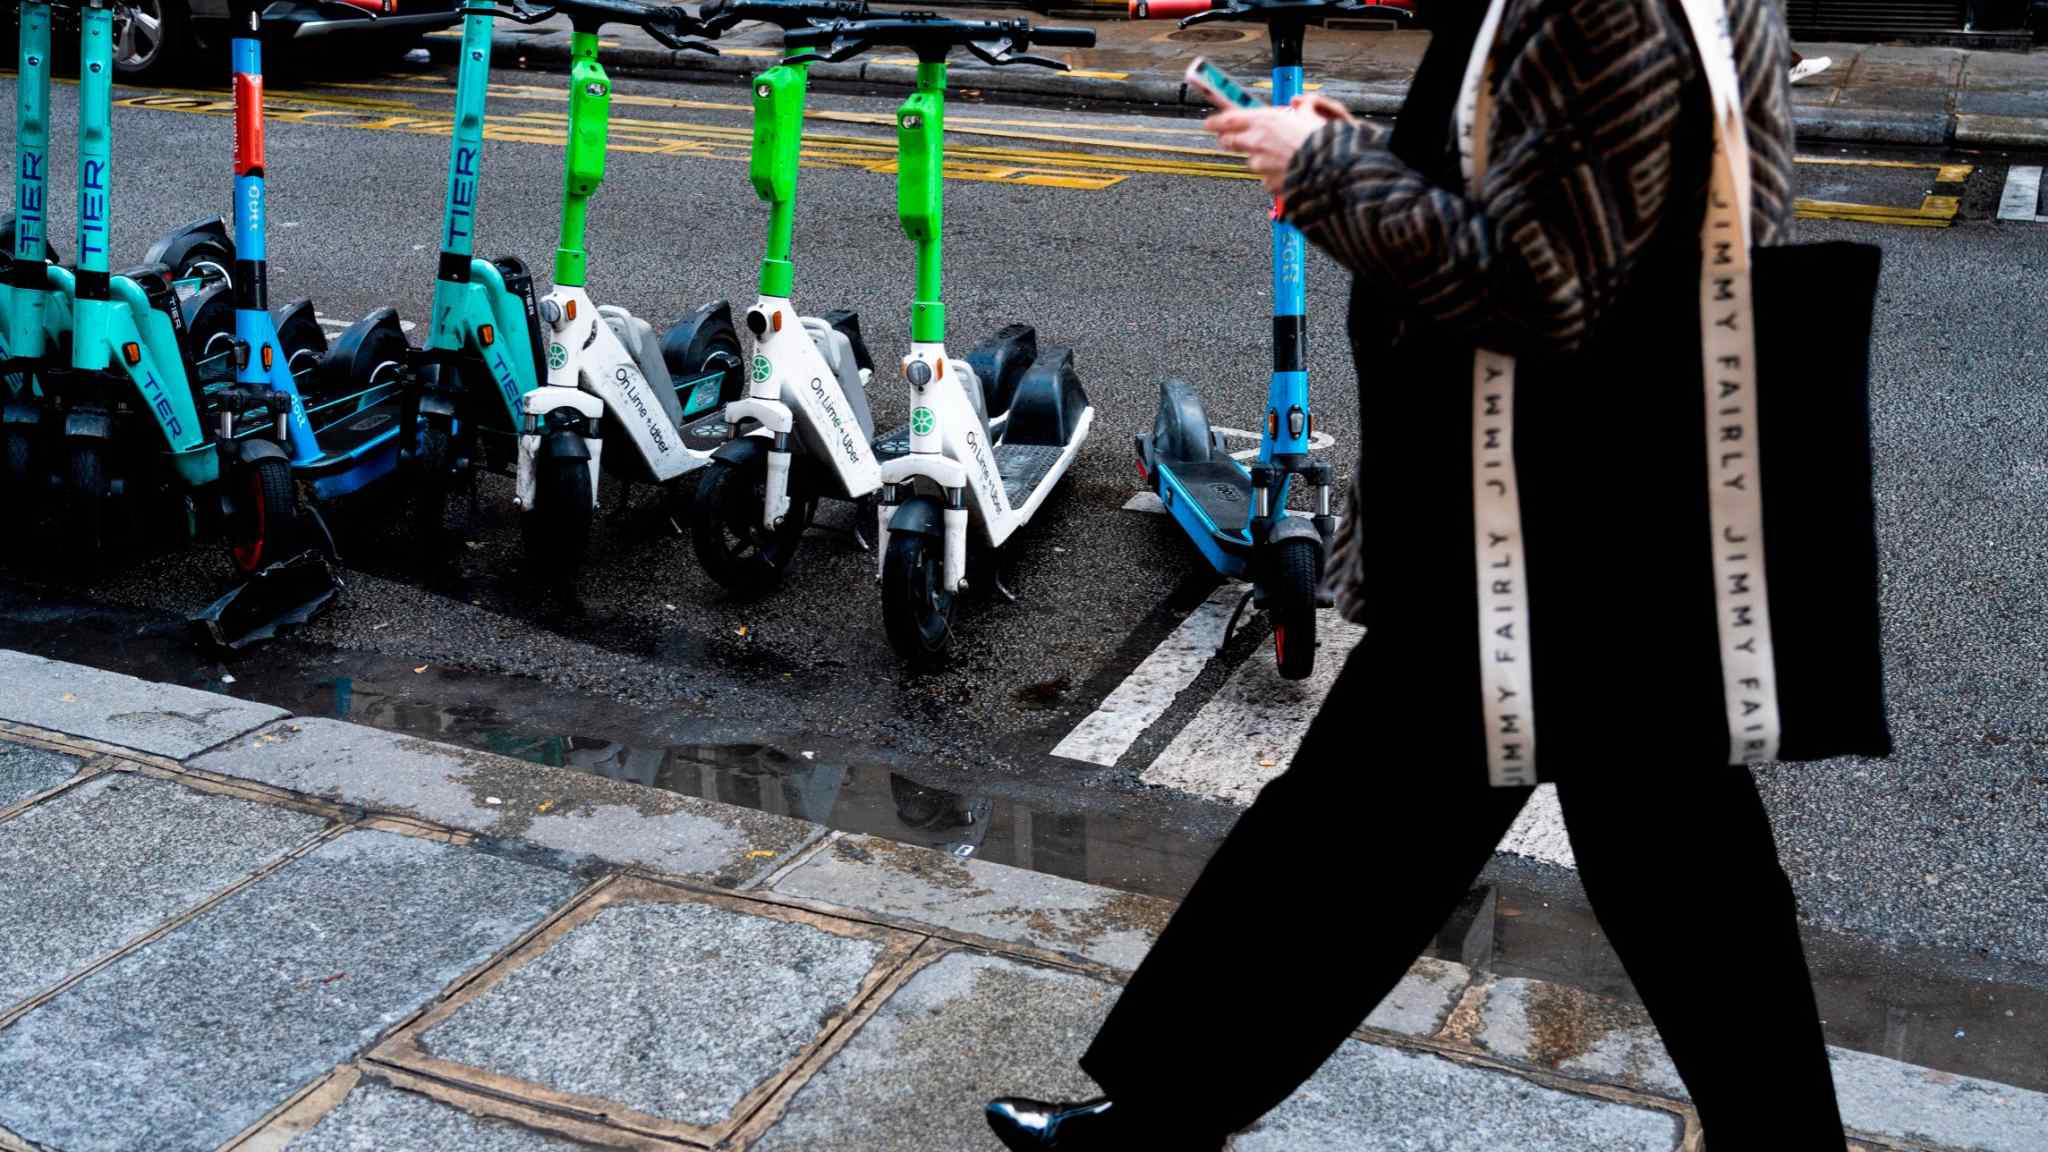 ‘They fuel anxiety’: Paris to vote on ubiquitous e-scooters 